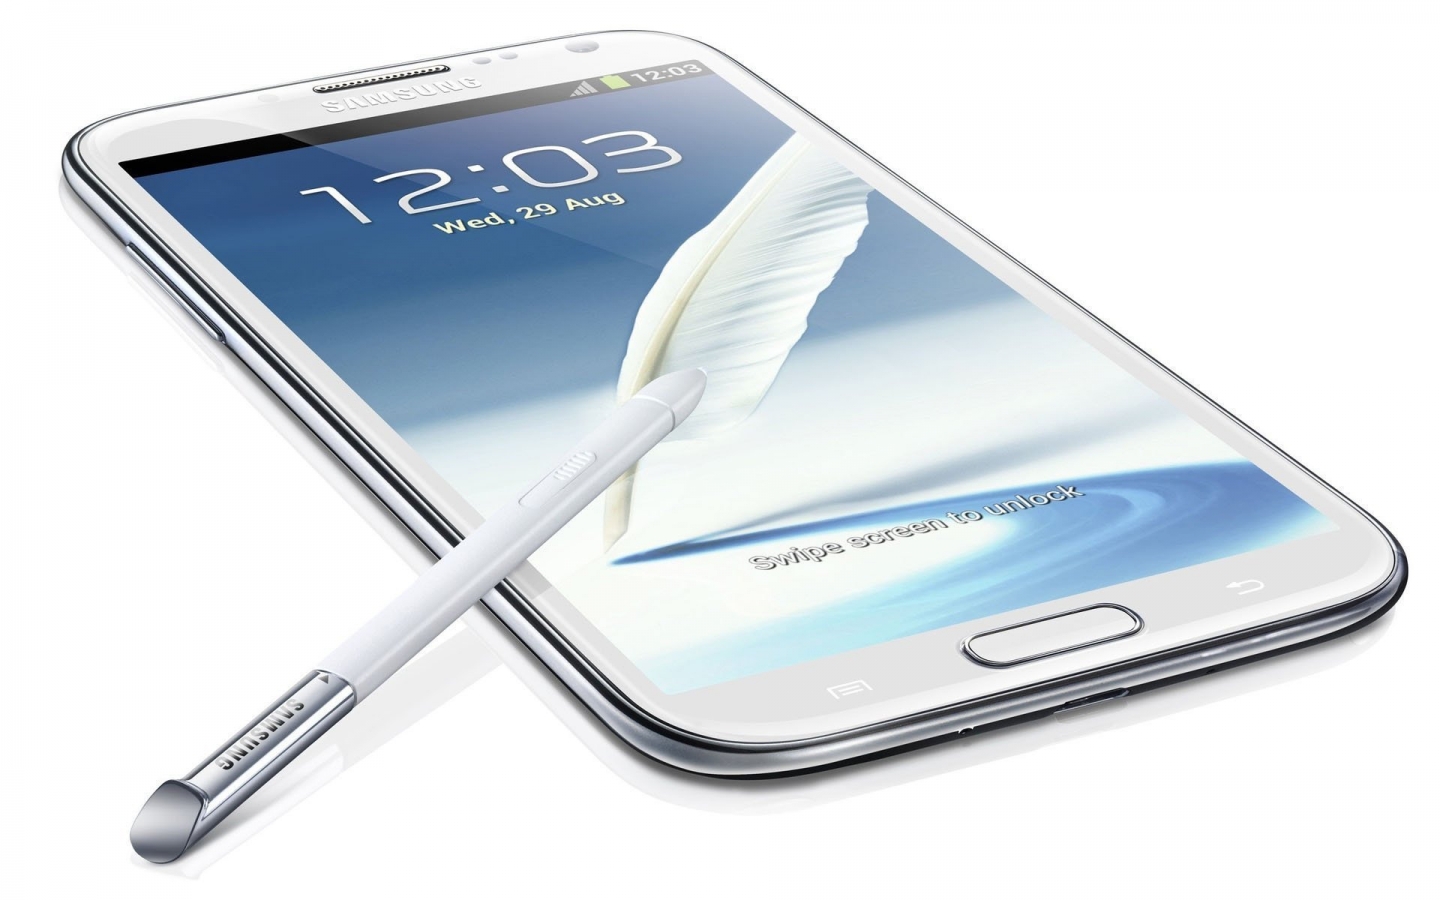 White Samsung Galaxy S3 for 1440 x 900 widescreen resolution